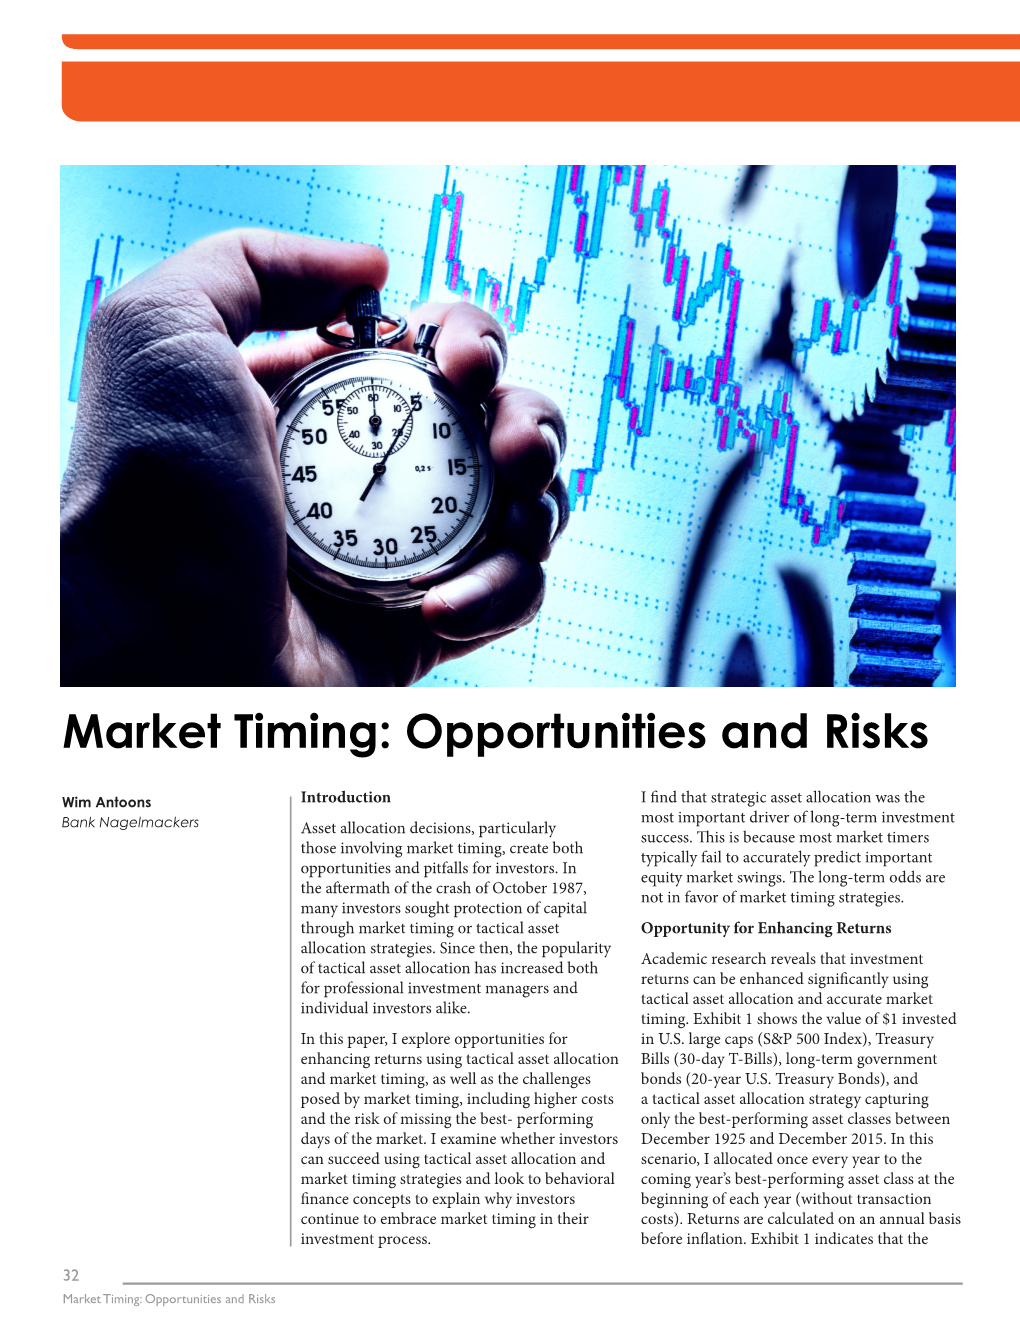 Market Timing: Opportunities and Risks